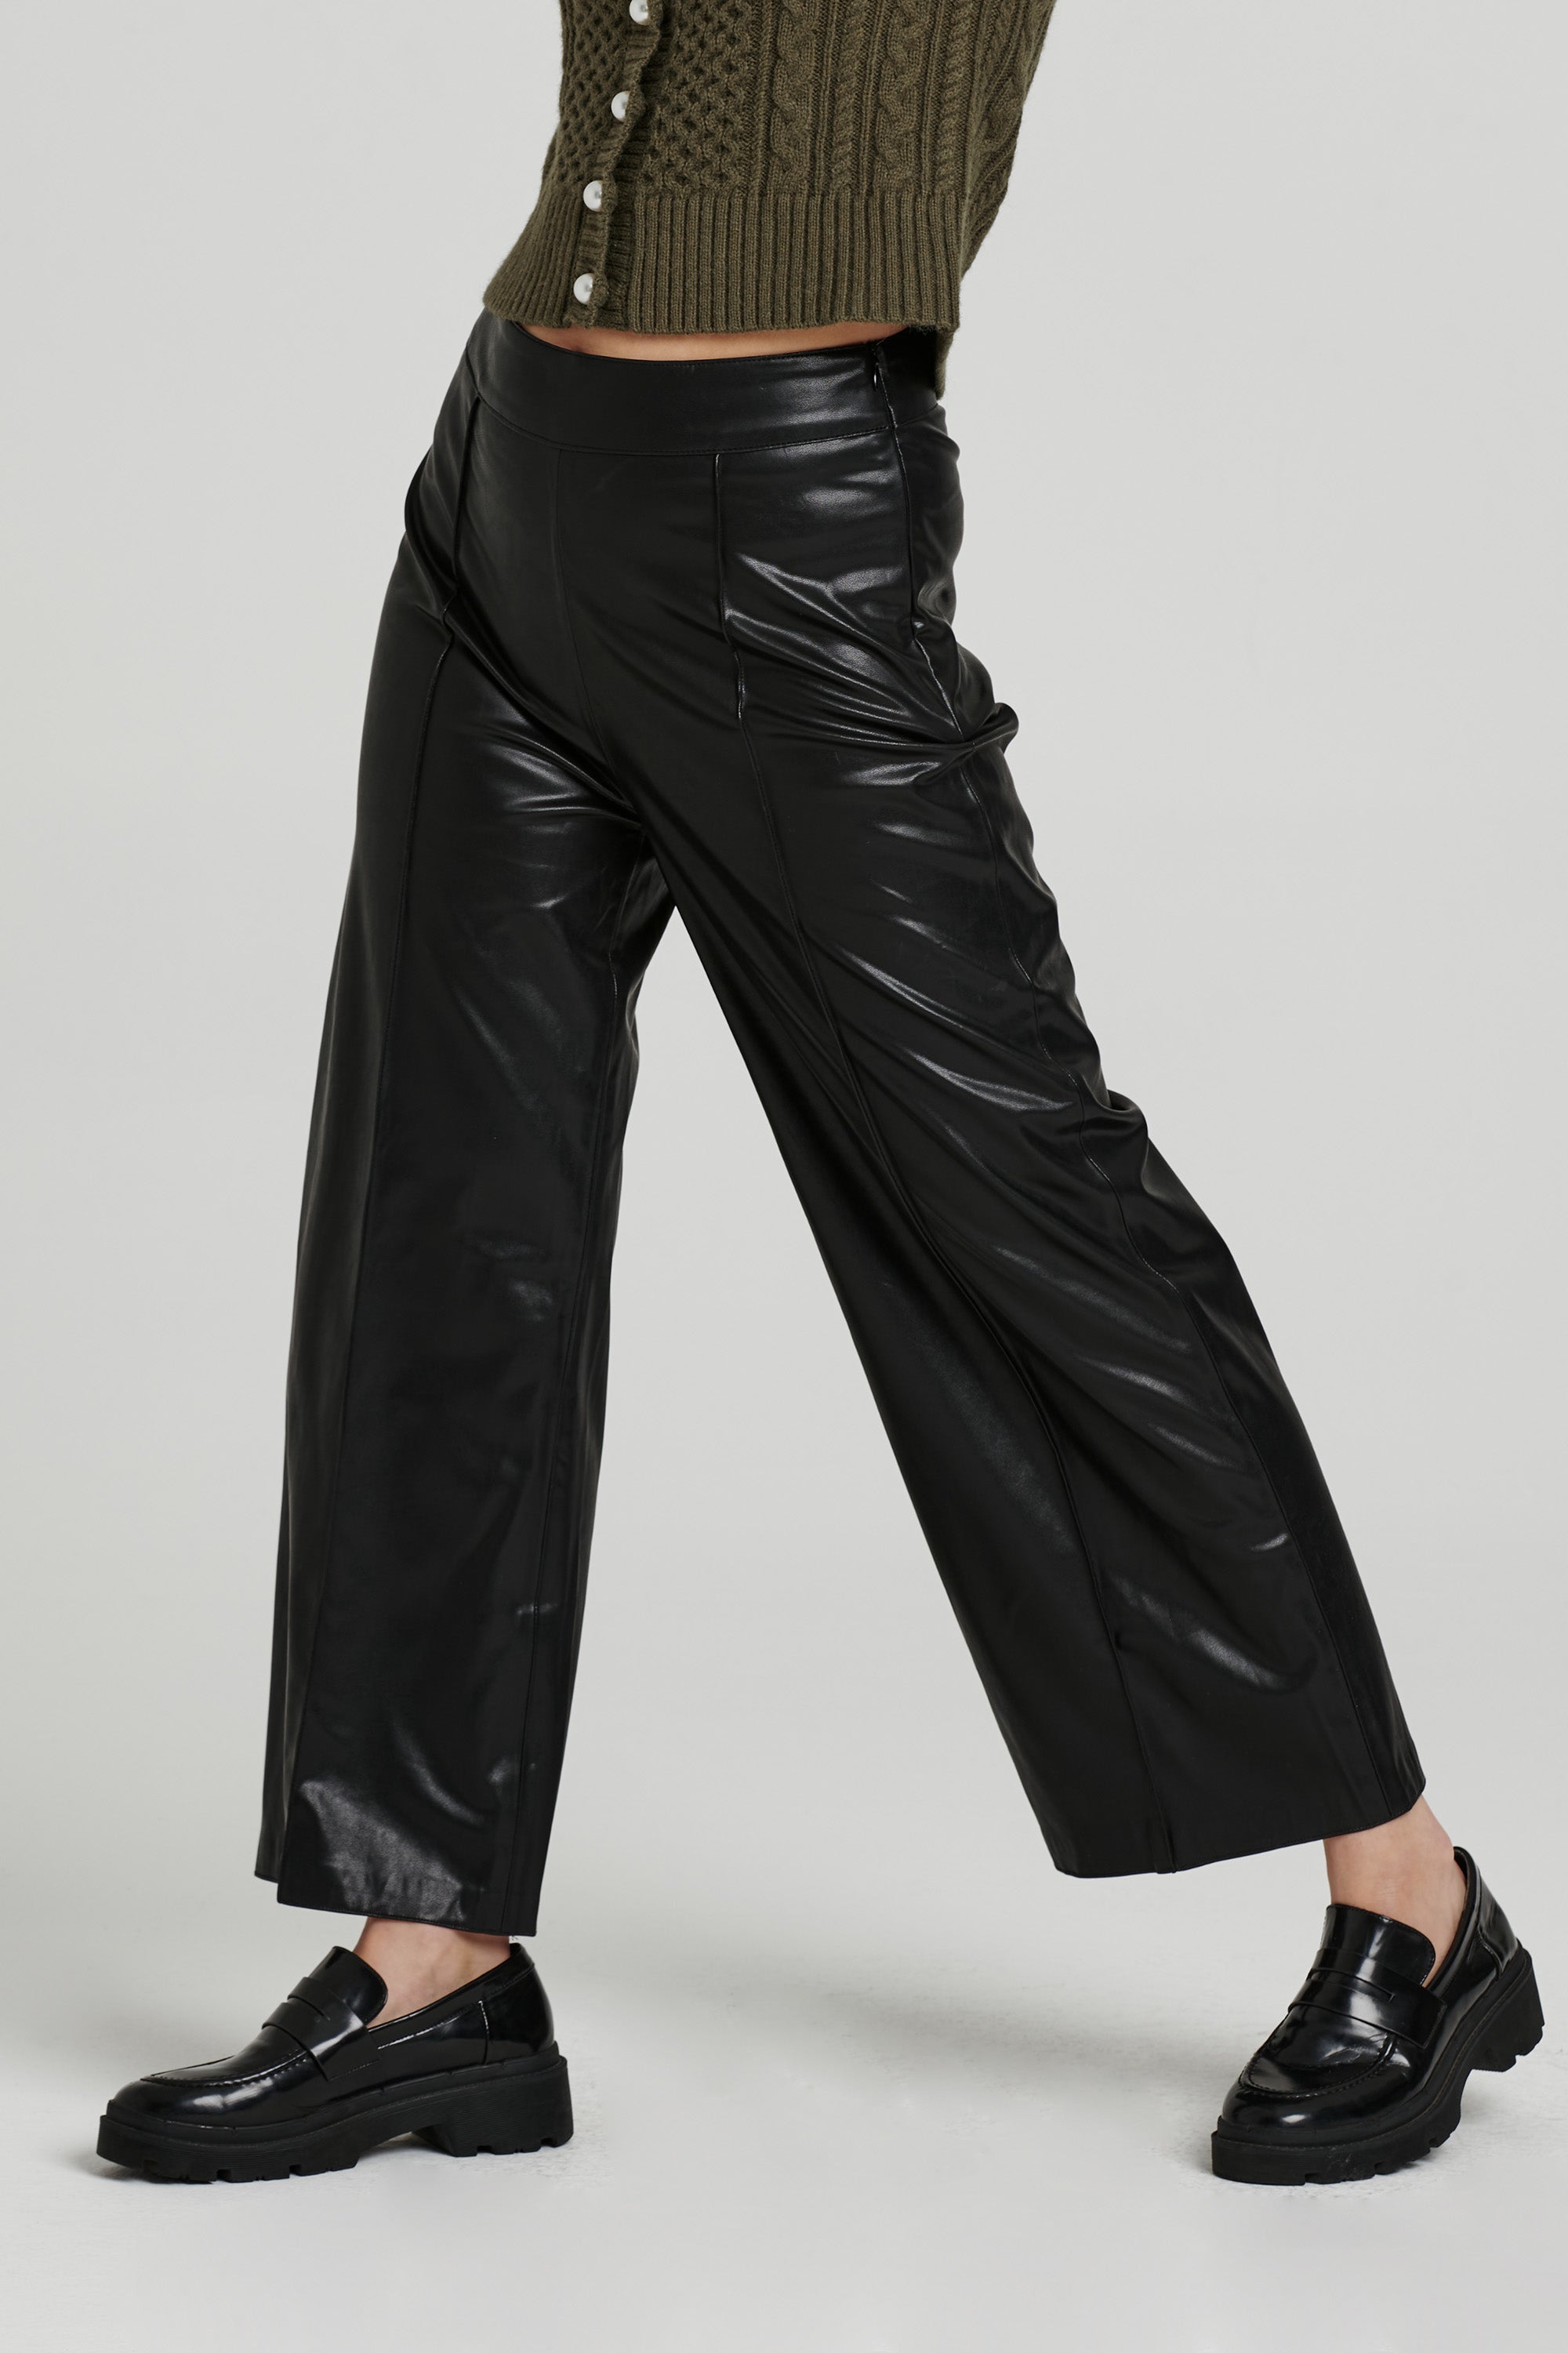 warehouse Leather Trousers for Women sale - discounted price | FASHIOLA.in